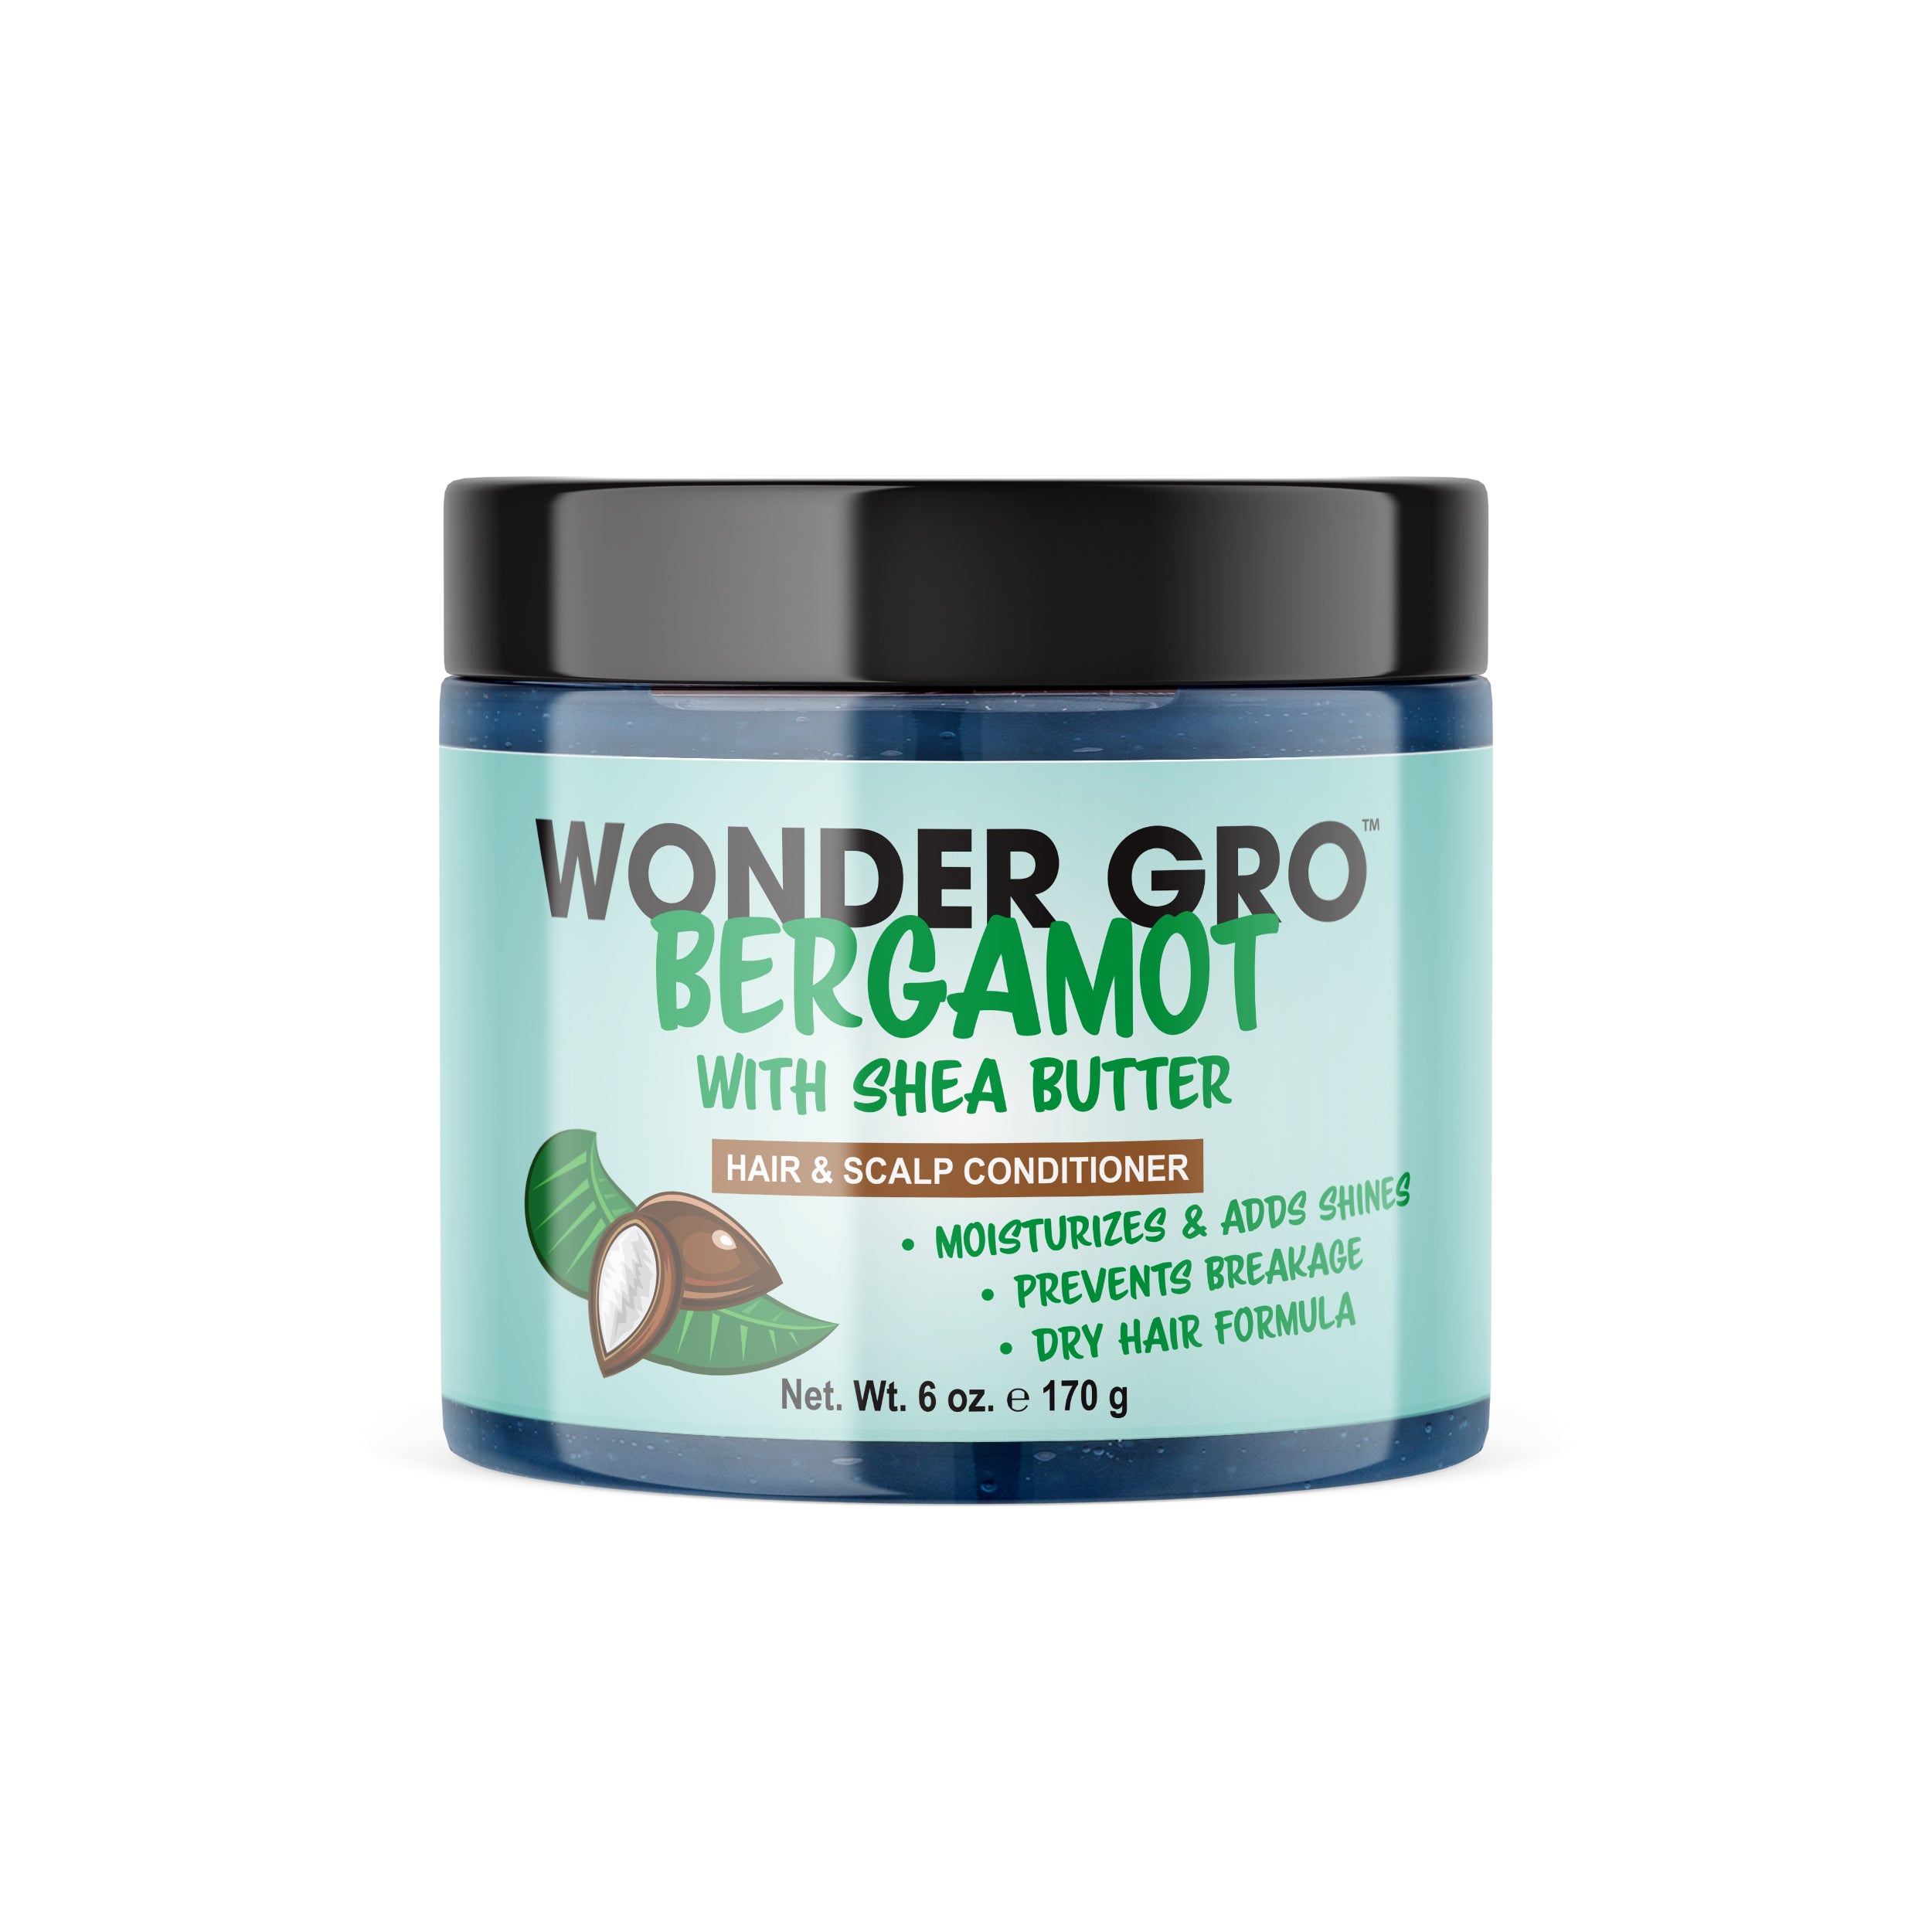 Wonder Gro Bergamot Hair & Scalp Conditioner with Shea Butter - Front